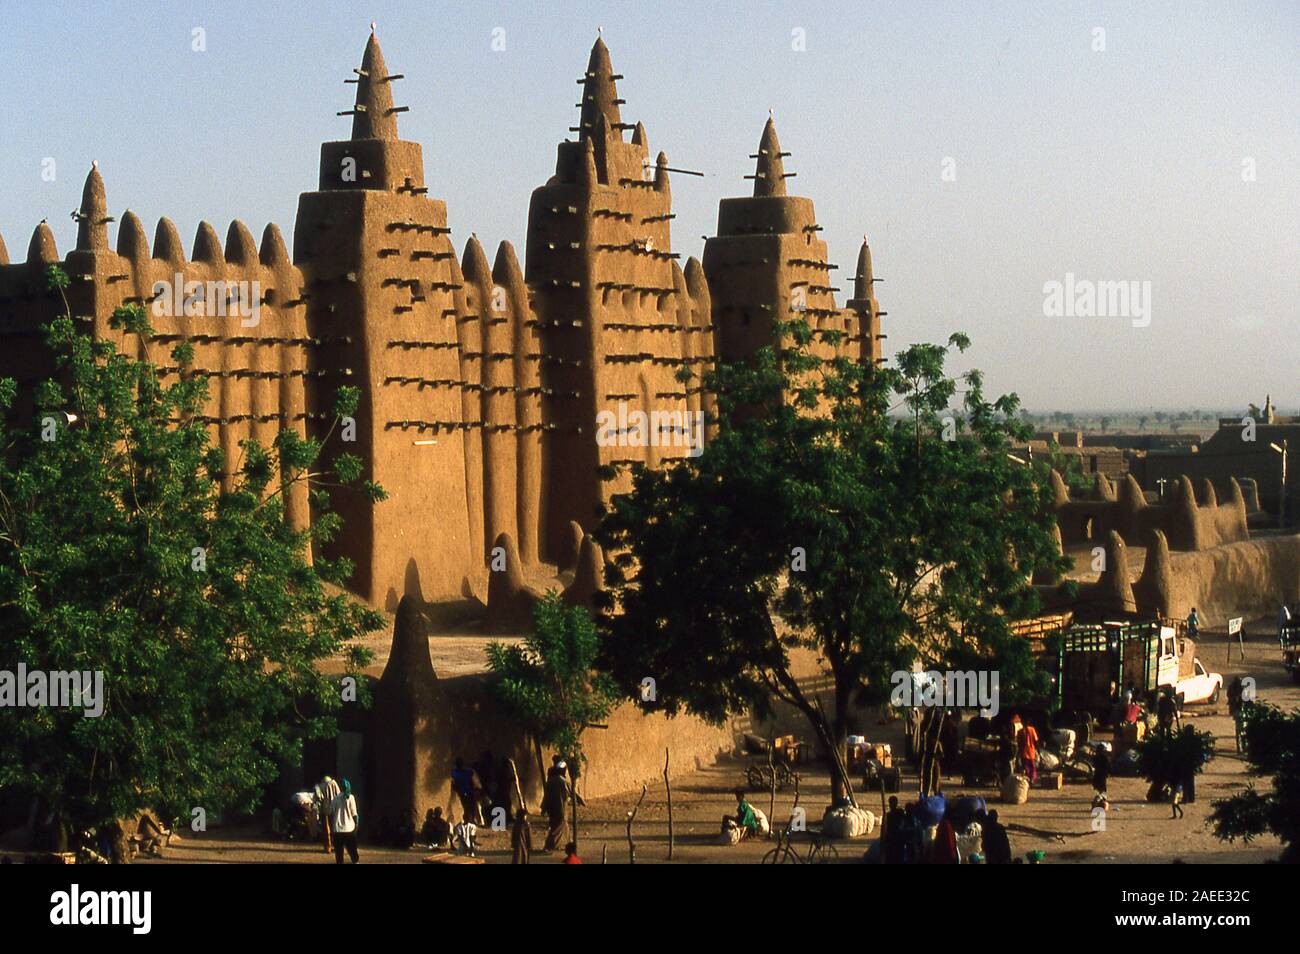 The Great Mosque in Djenne, Mali Stock Photo